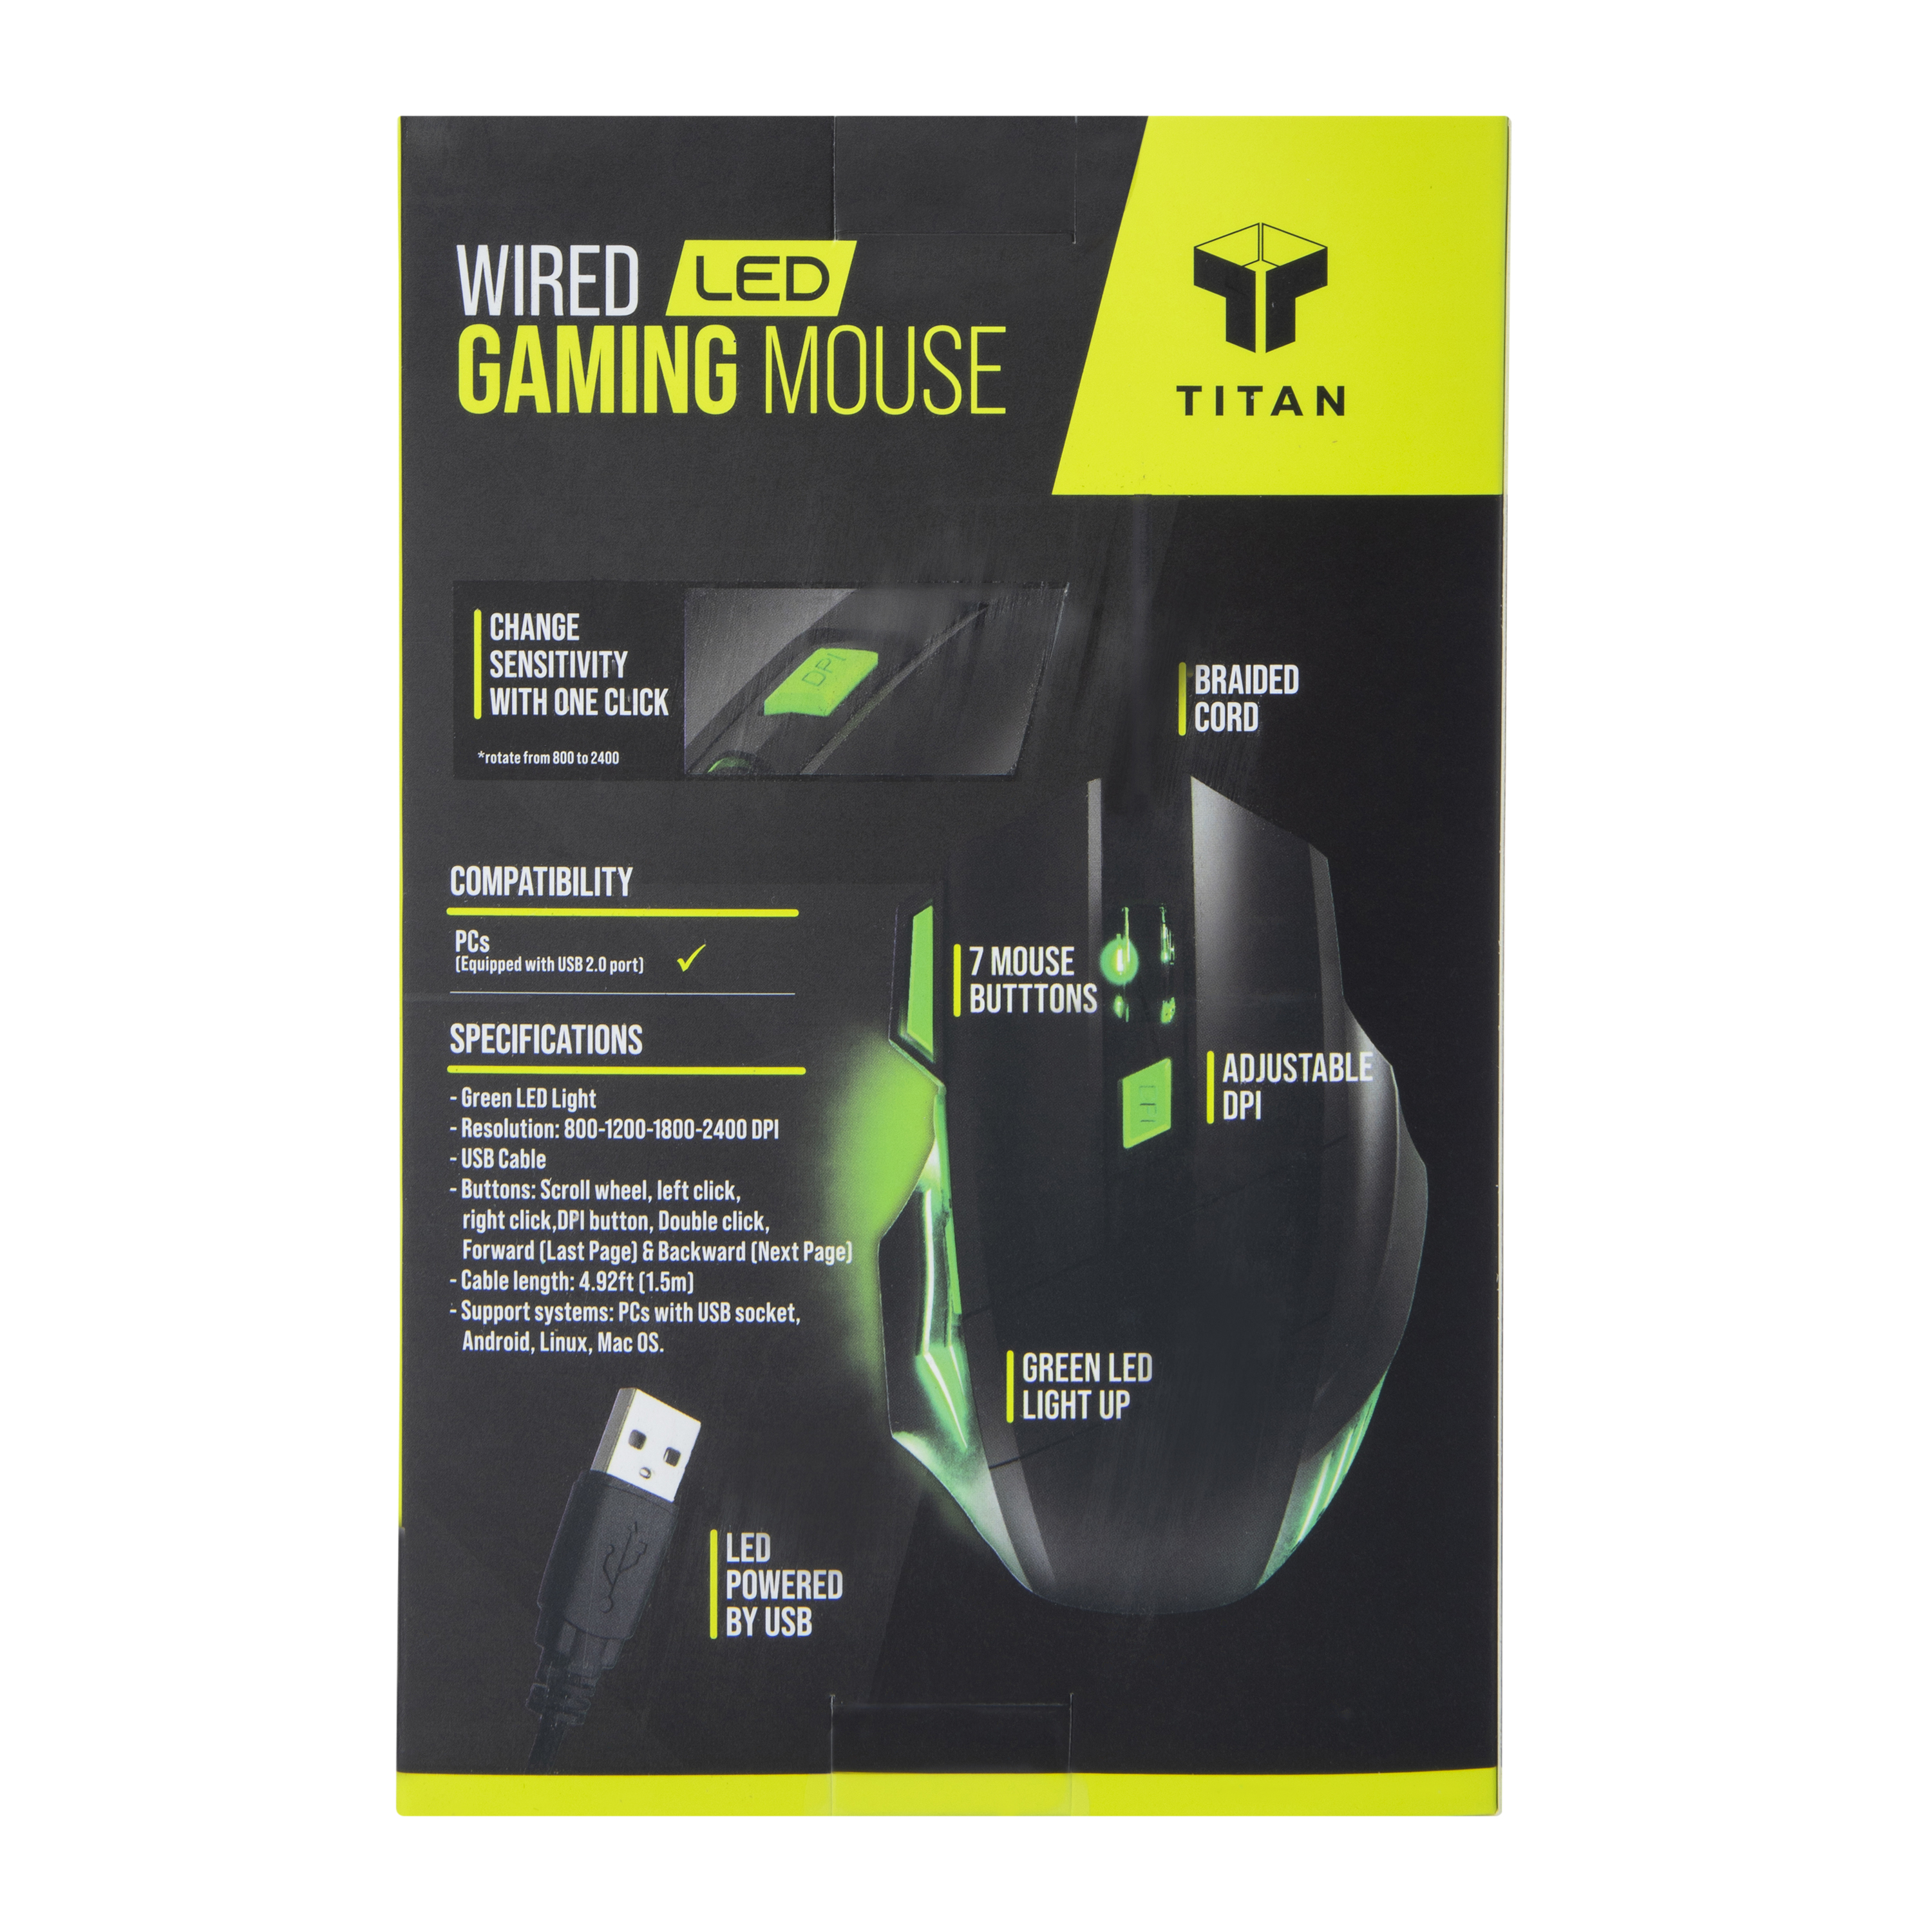 wired LED gaming mouse | Five Below